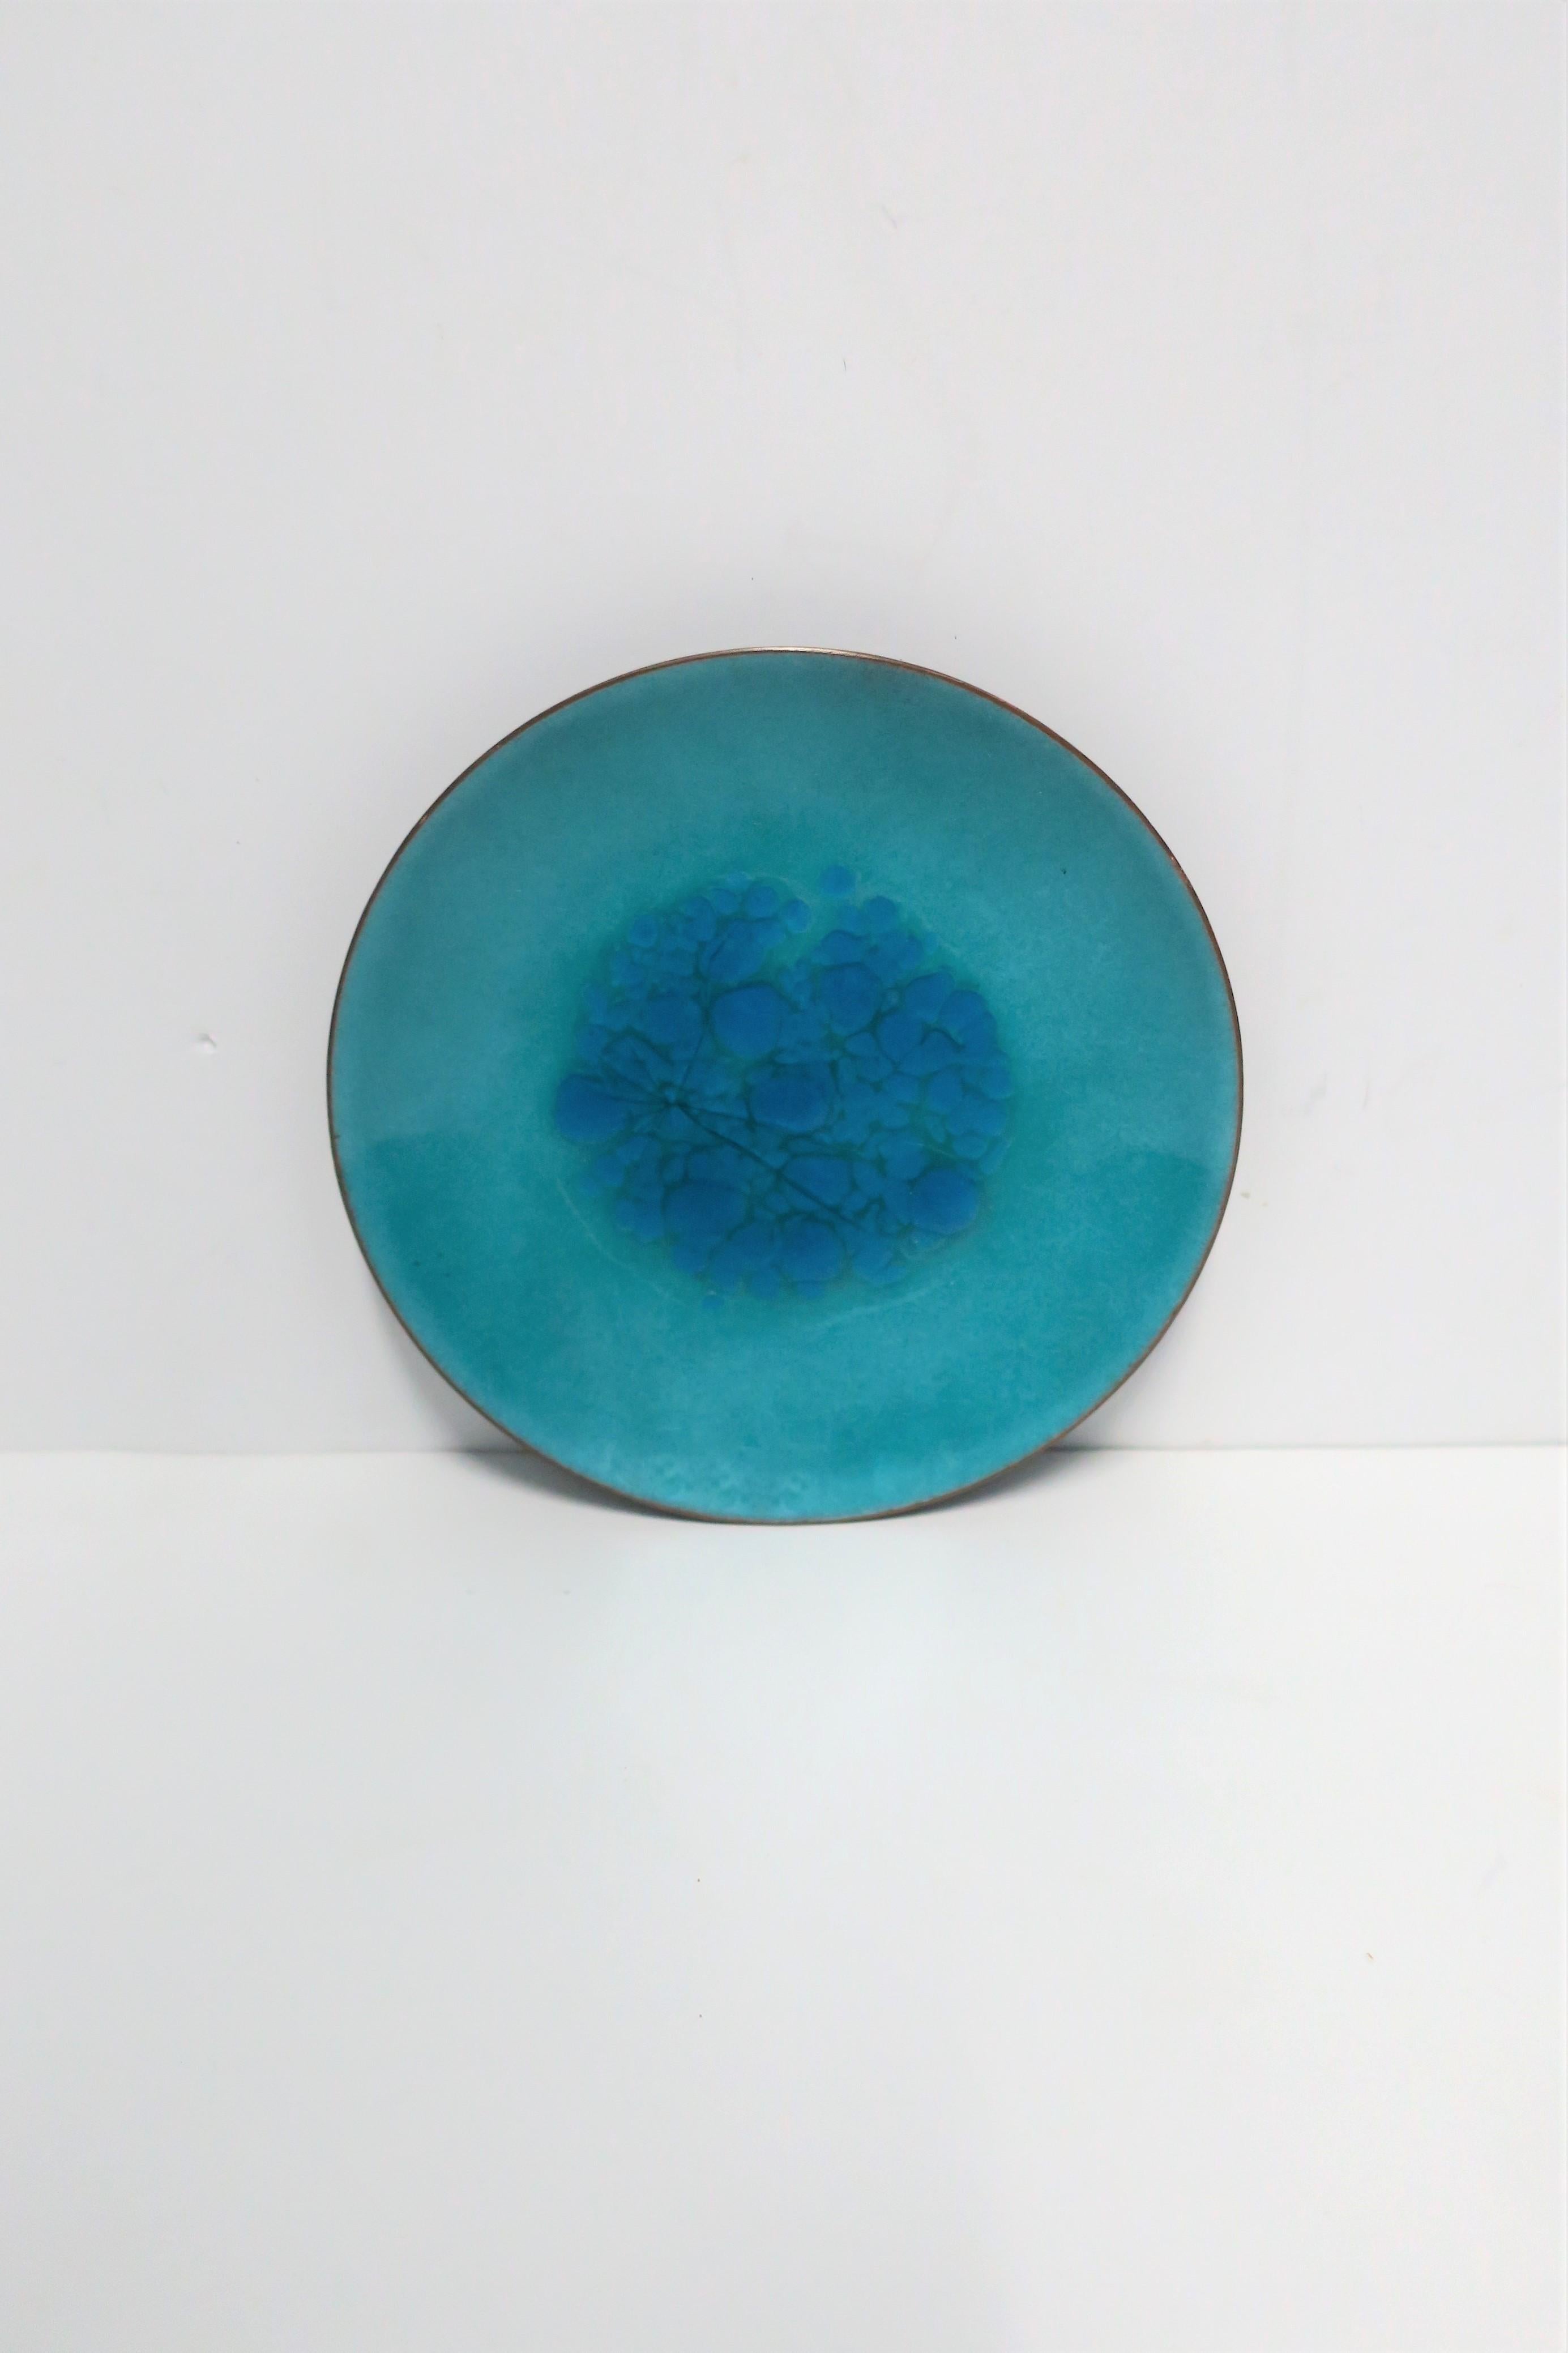 A very beautiful and substantial Mid-Century Modern round blue enamel dish, plate, or vide-poche, circa 1960s, mid-20th century. A great standalone piece or as a catchall for change/coins, jewelry or other small items, perhaps on a desk, vanity,